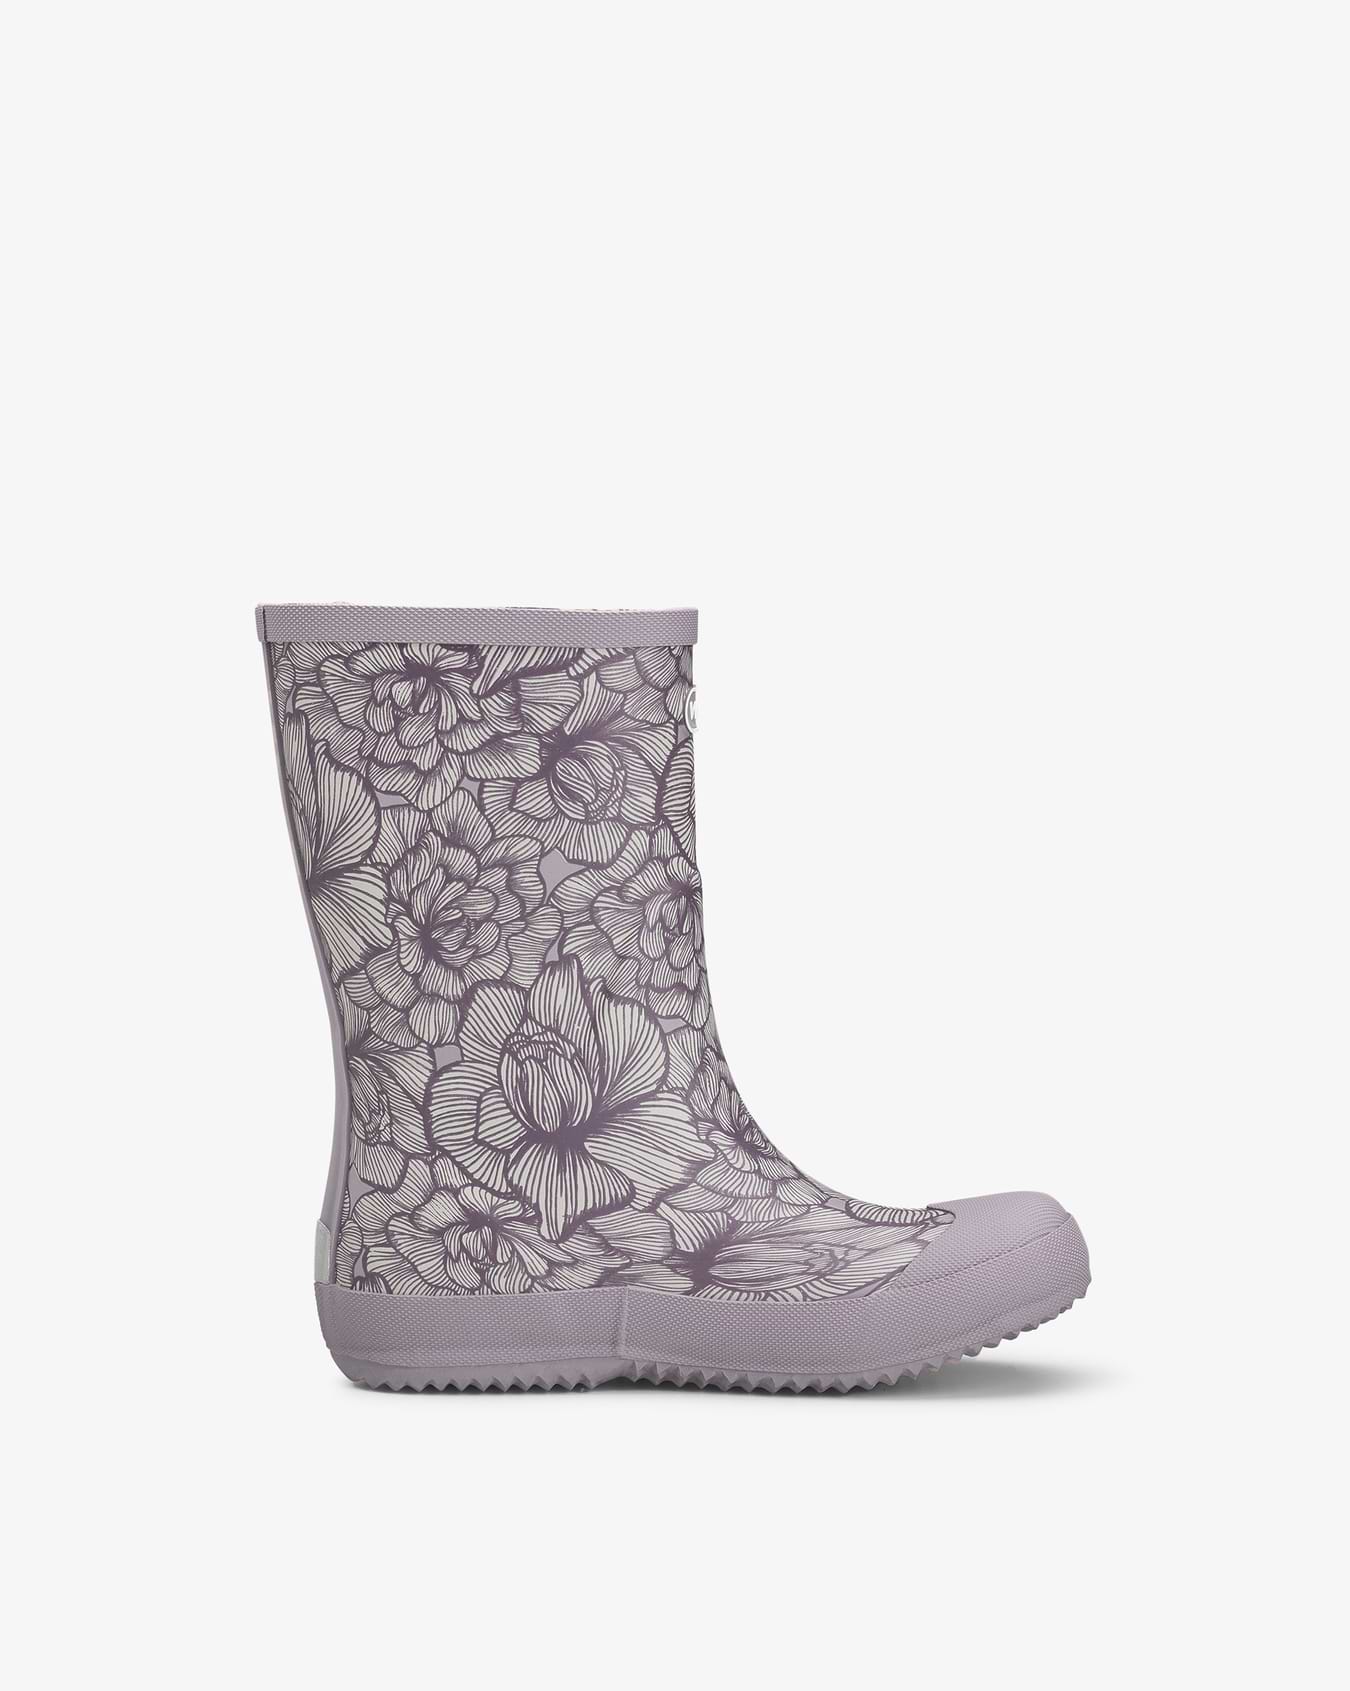 Indie Print Dusty Pink/Cream Rubber Boot